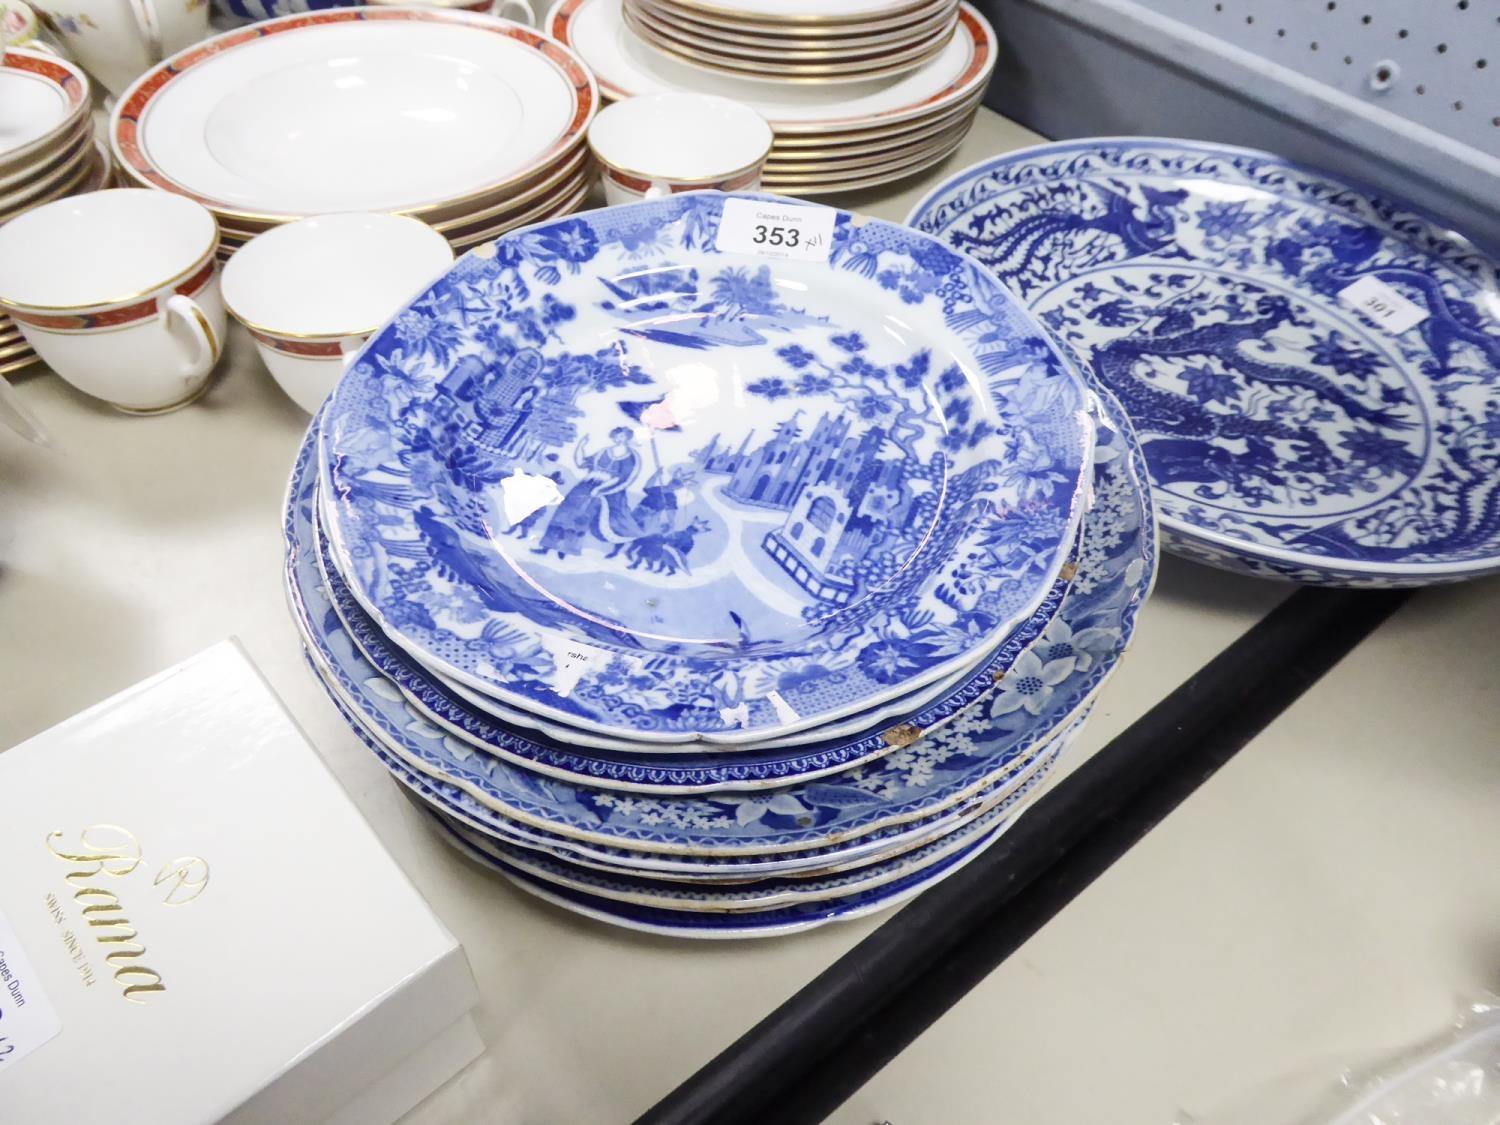 ELEVEN 19th CENTURY PRINTED BLUE AND WHITE POTTERY PLATES by Rogers & others, all with topographical